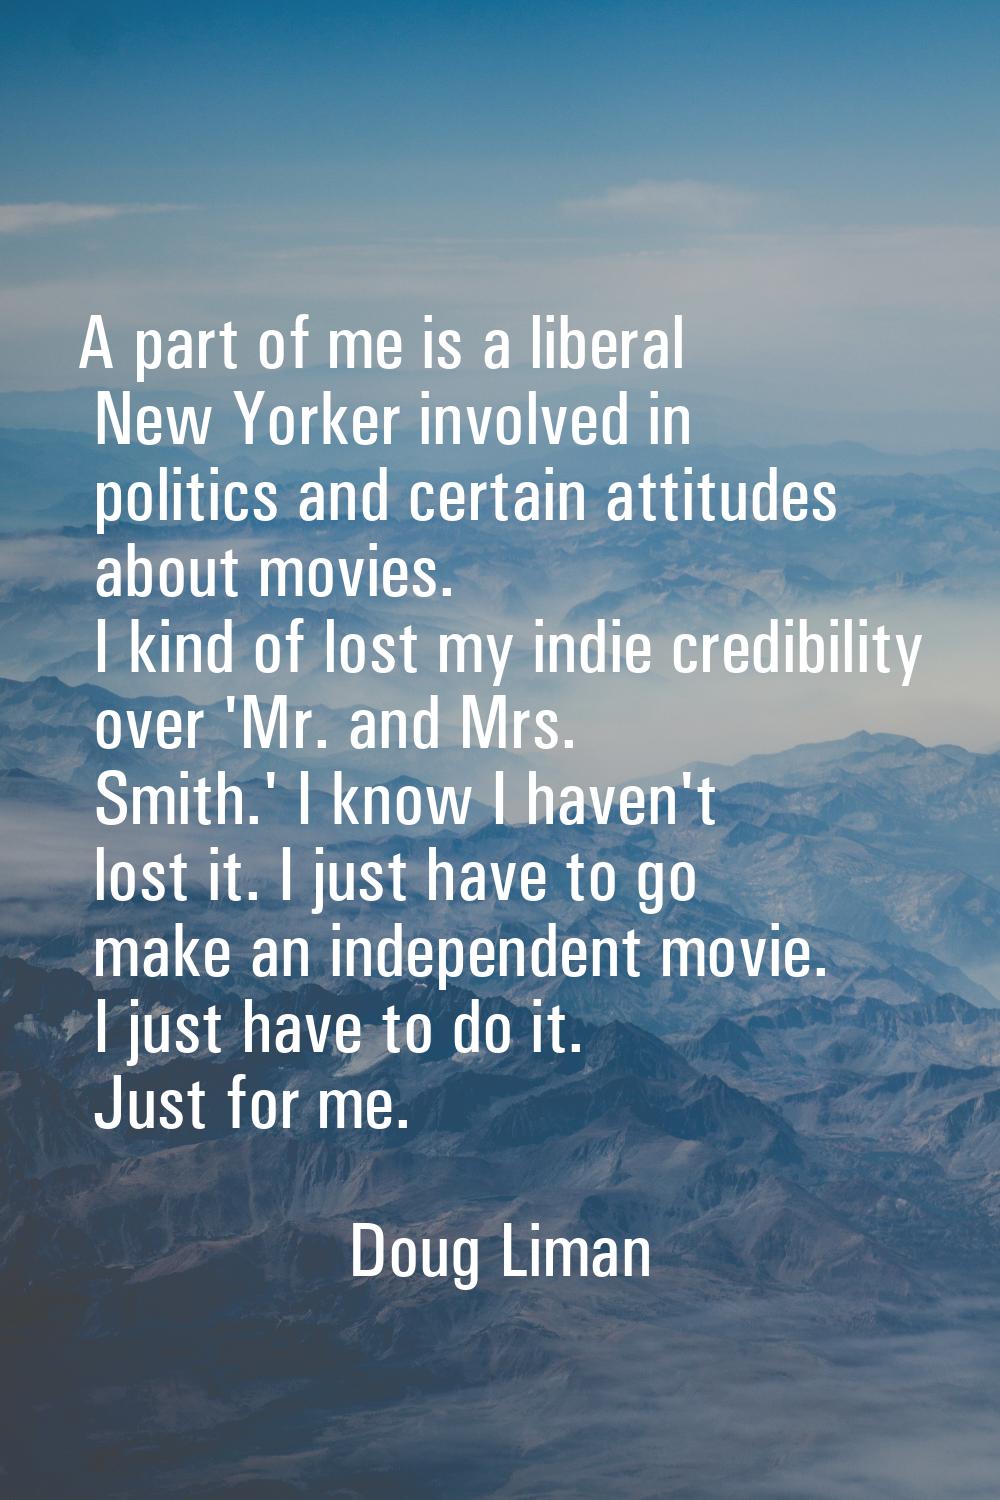 A part of me is a liberal New Yorker involved in politics and certain attitudes about movies. I kin